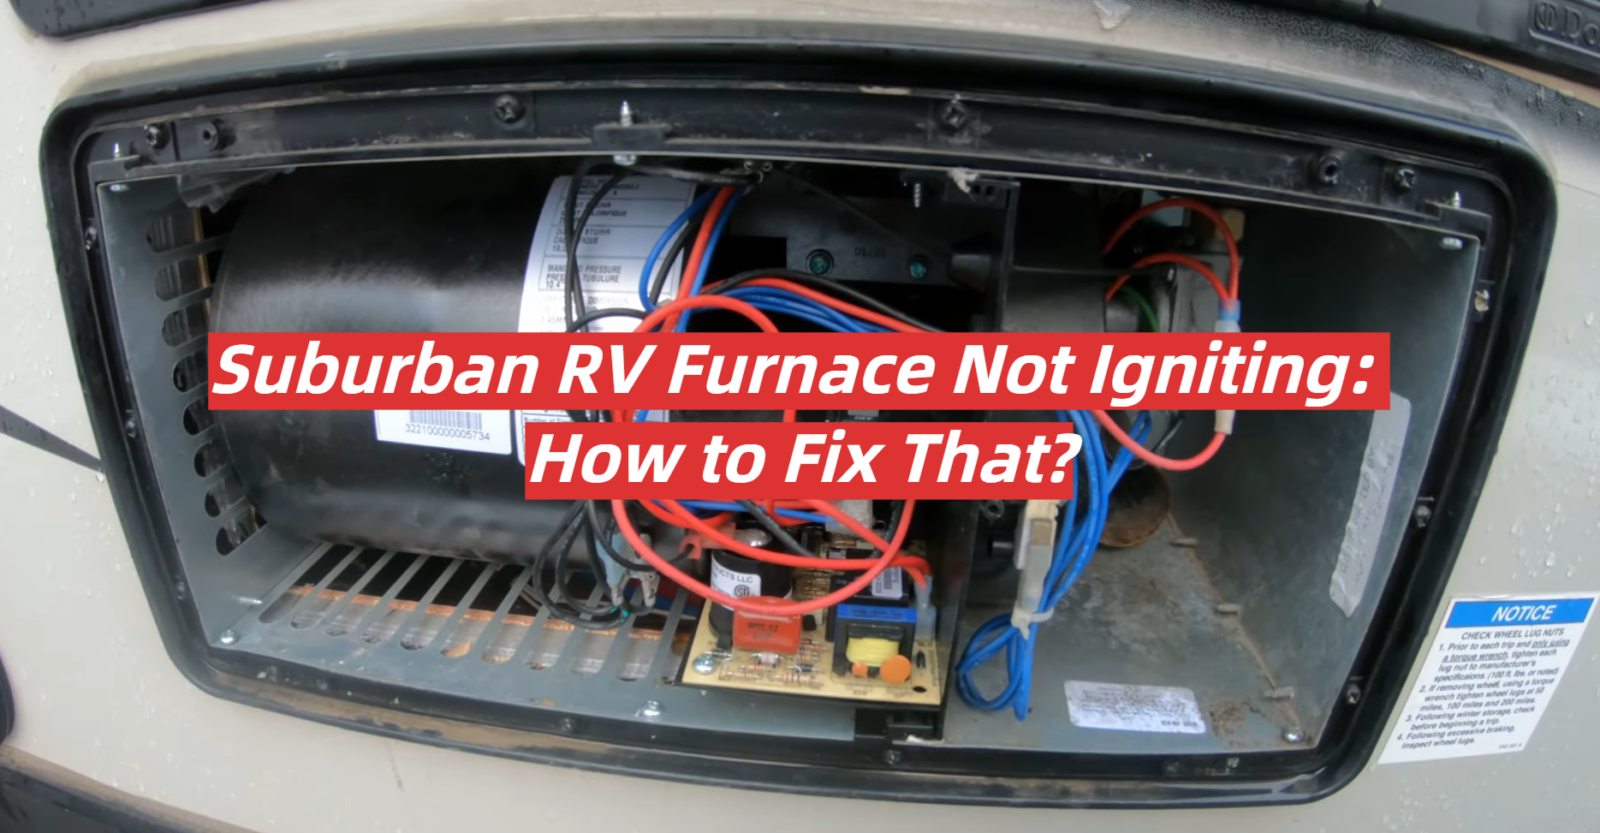 Suburban RV Furnace Not Igniting: How to Fix That?